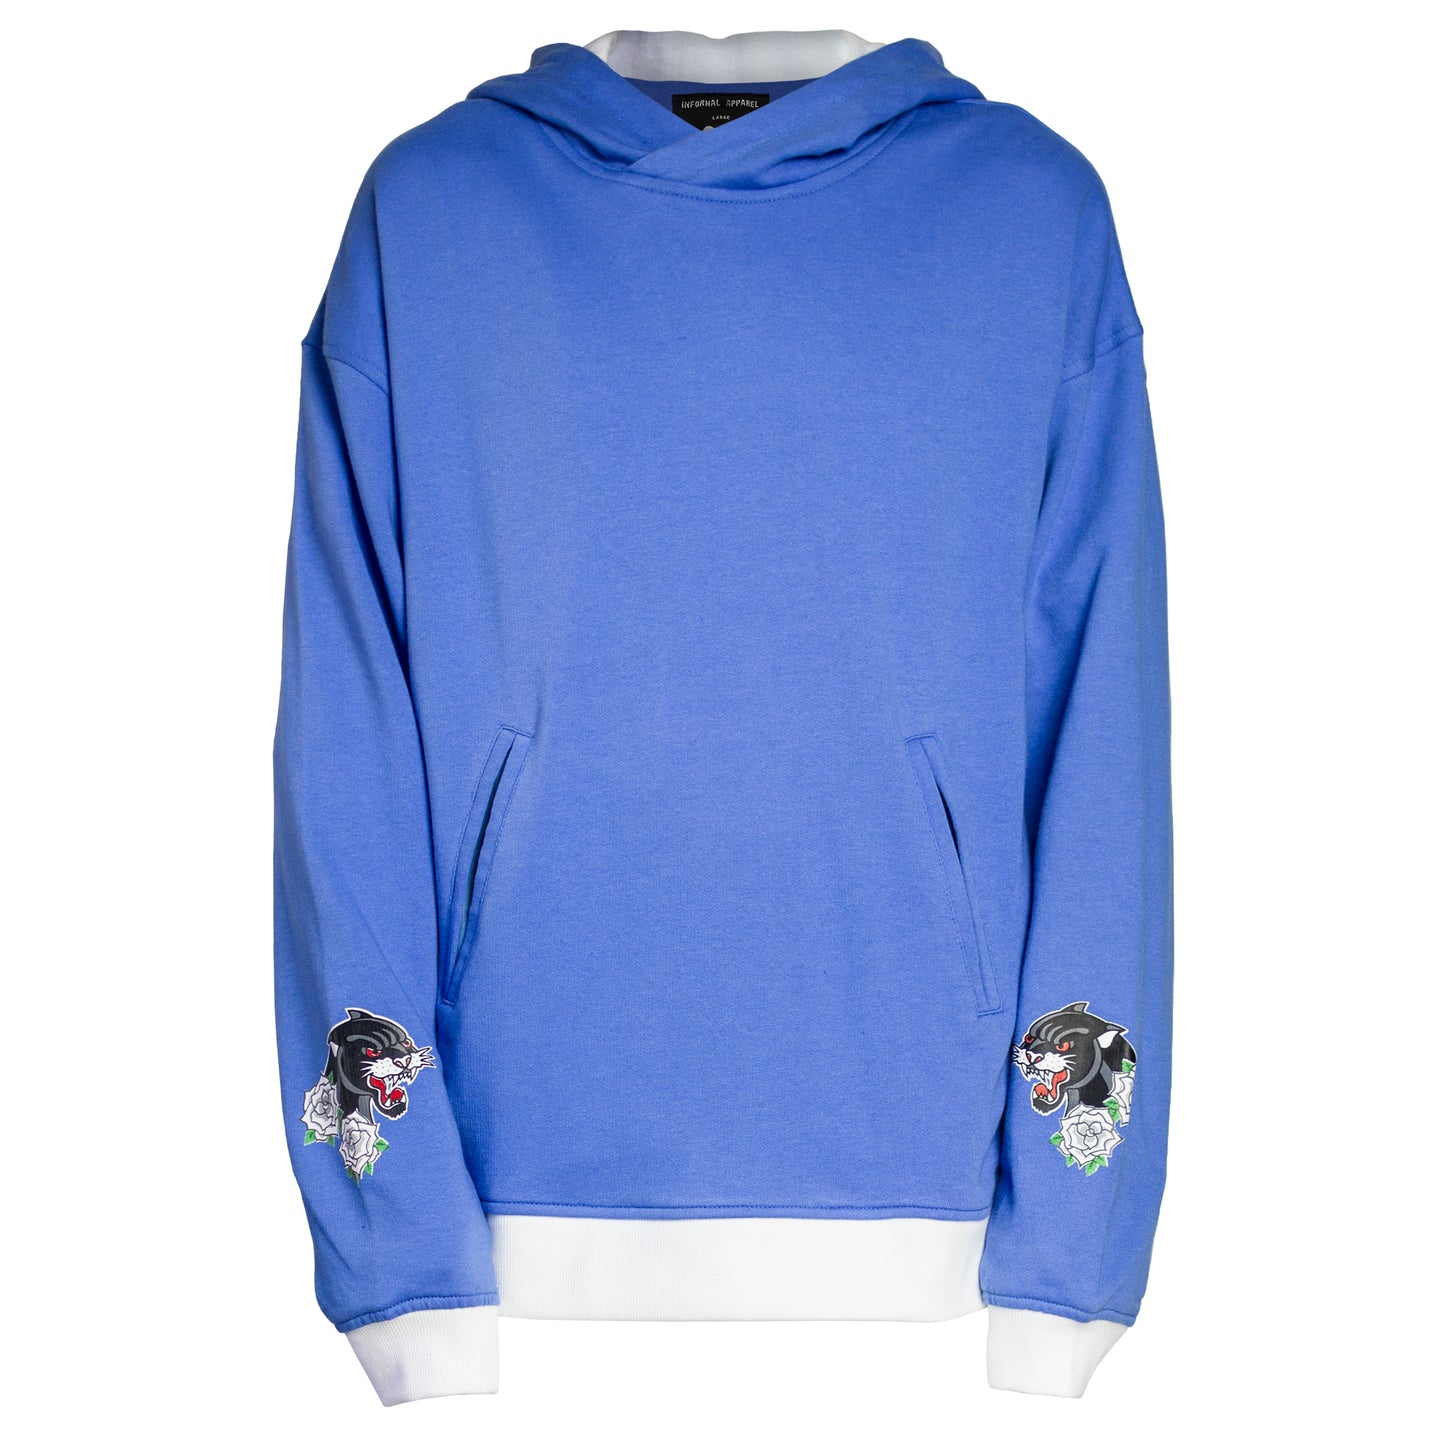 Panther Hoody : Turquoise/White